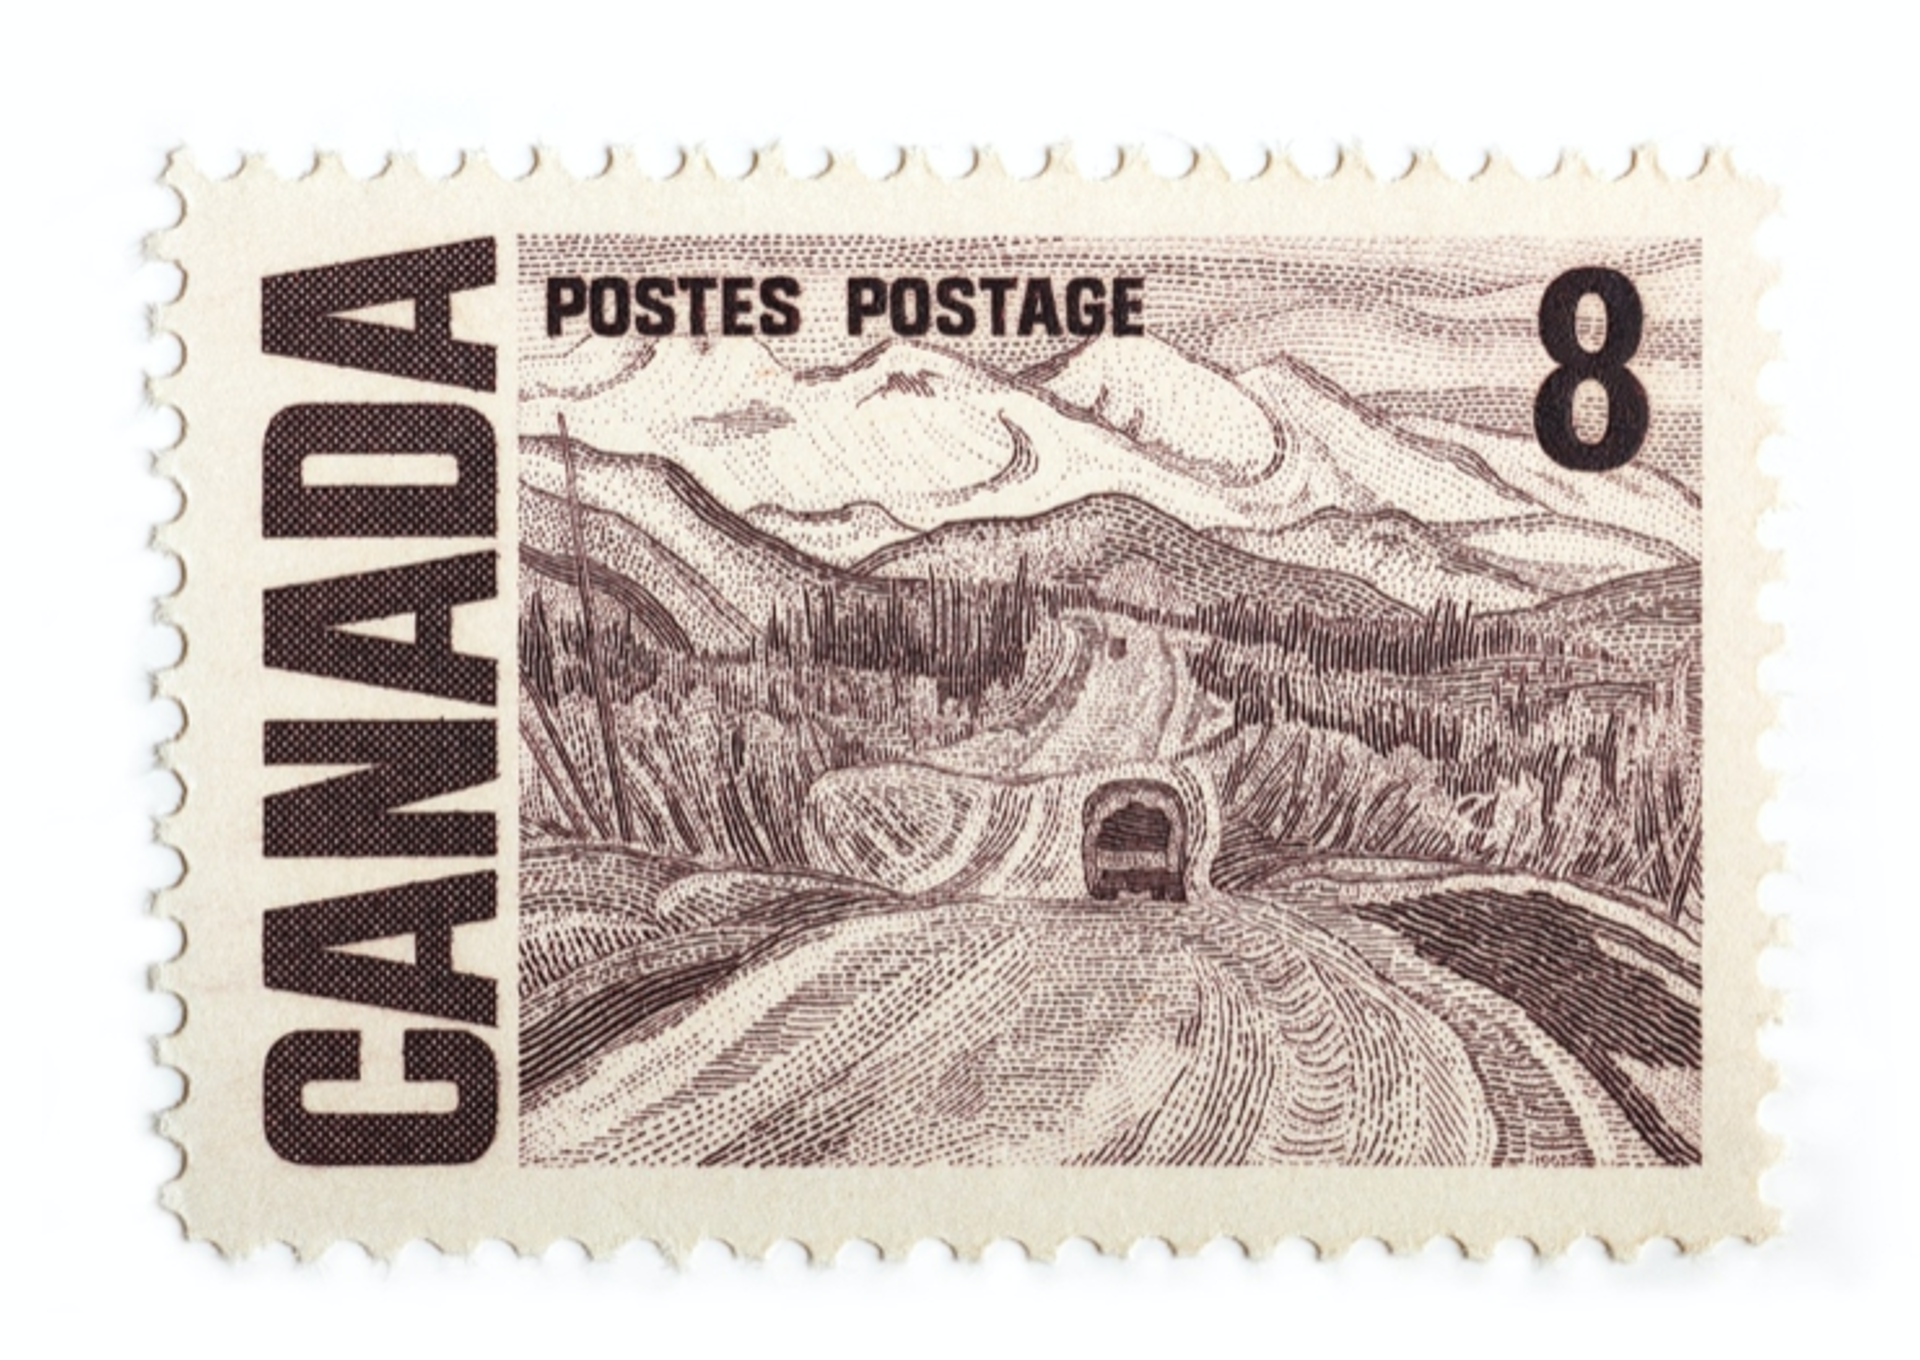 Canada Stamp 8 cents by Peter Andrew Lusztyk | Collectibles